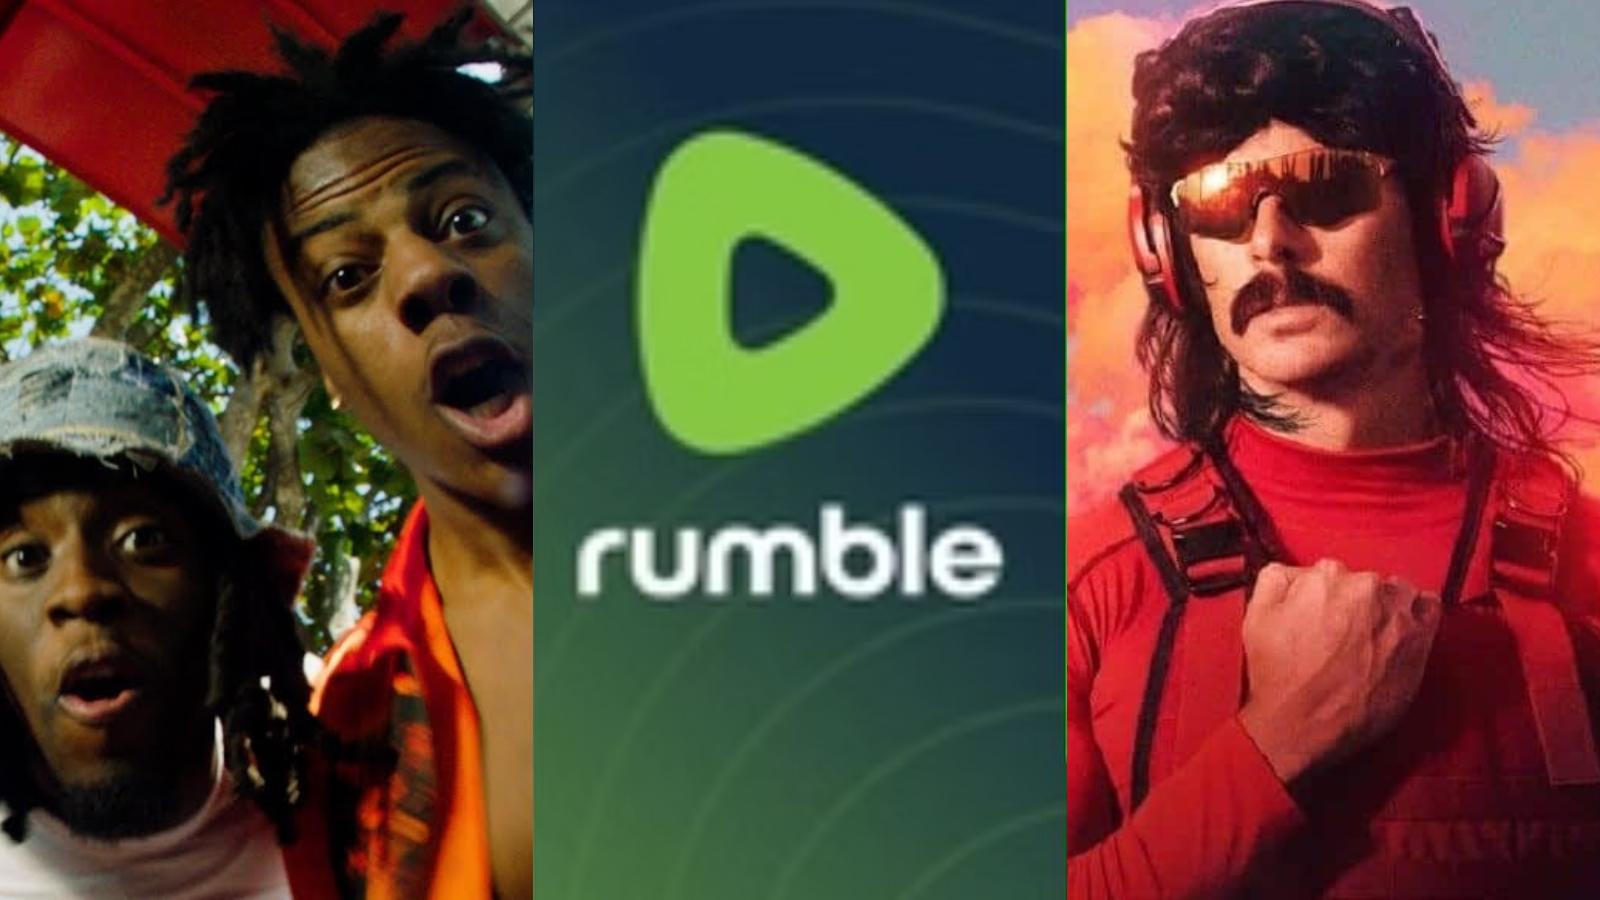 kai cenat, ishowspeed and dr disrespect with rumble logo